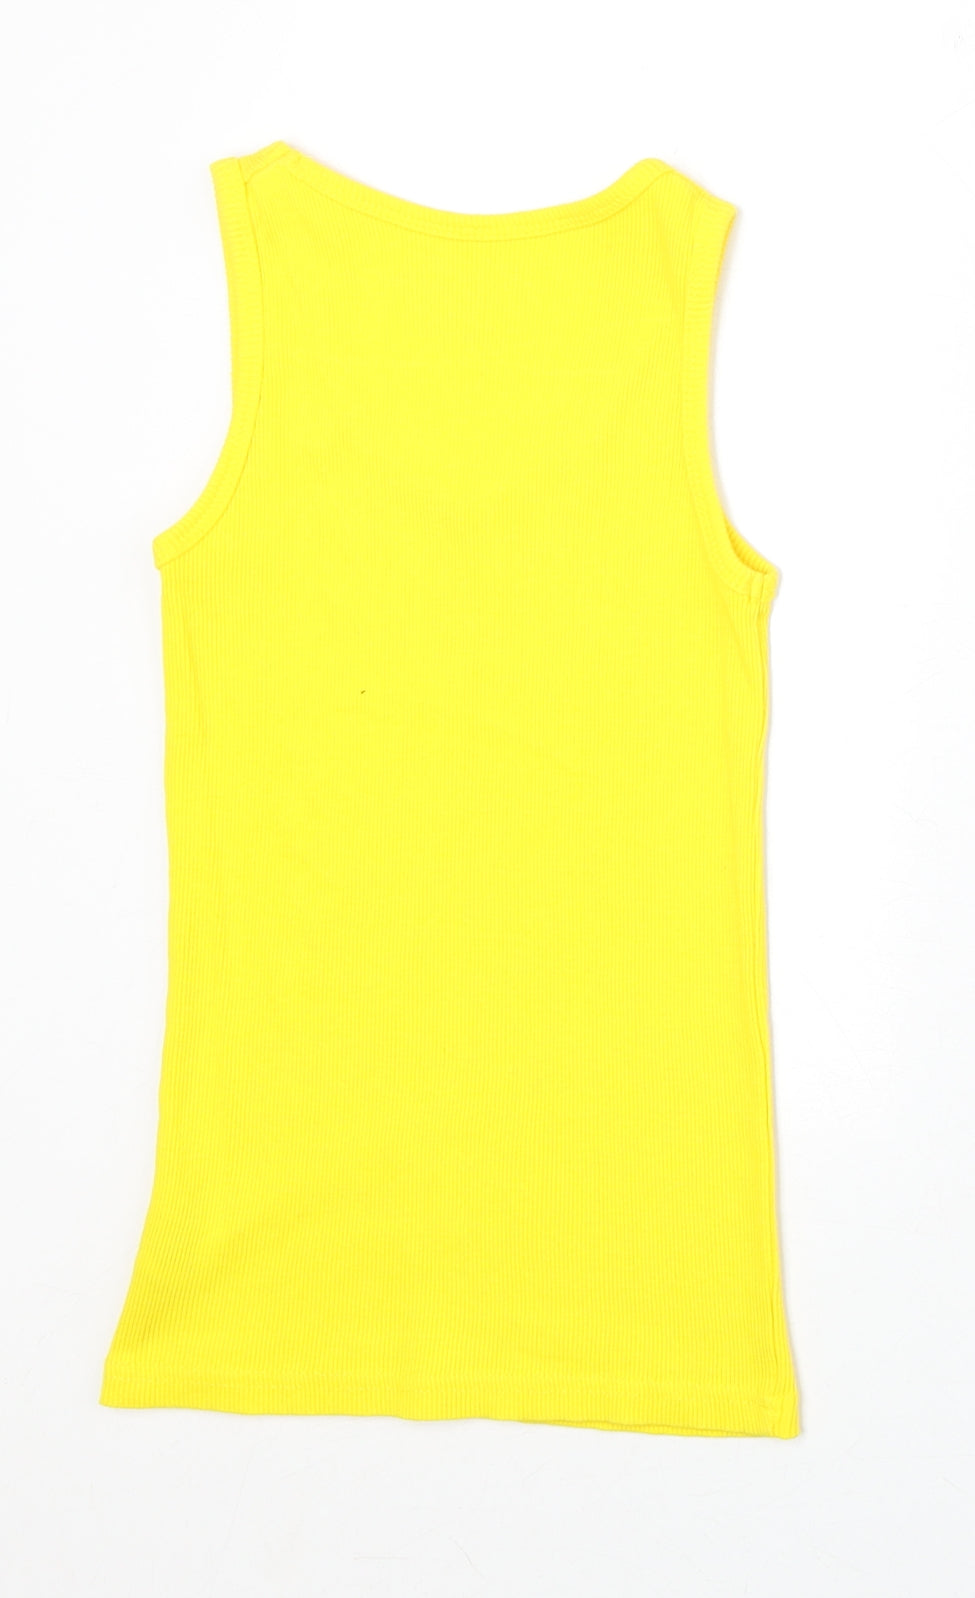 Young Dimension Girls Yellow 100% Cotton Basic Tank Size 11-12 Years Round Neck Pullover